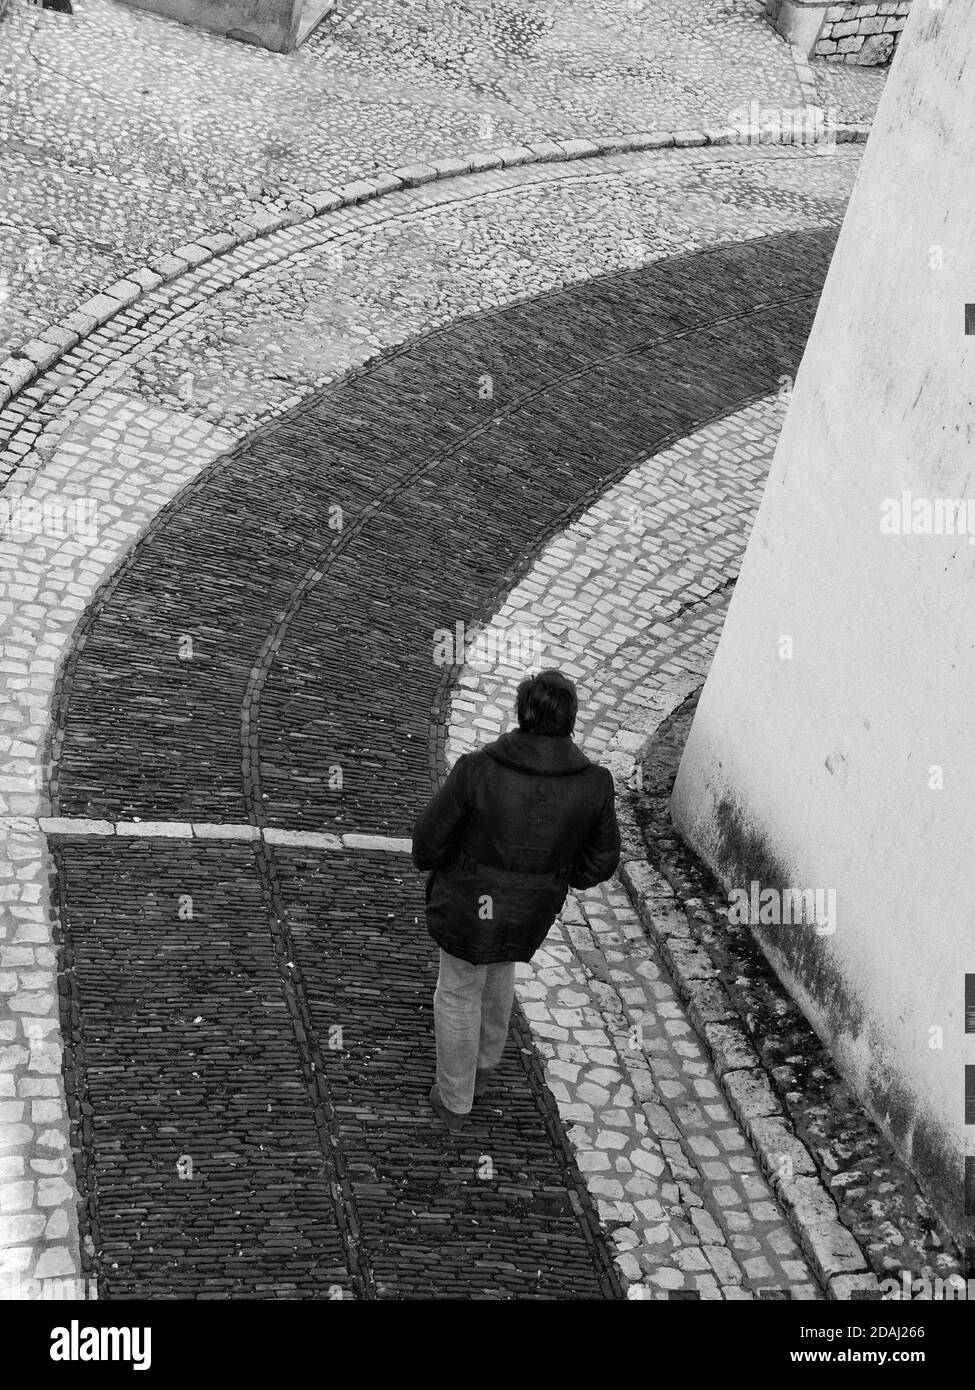 Monochrome, man walking down slope, seen from behind, hands in pockets Stock Photo